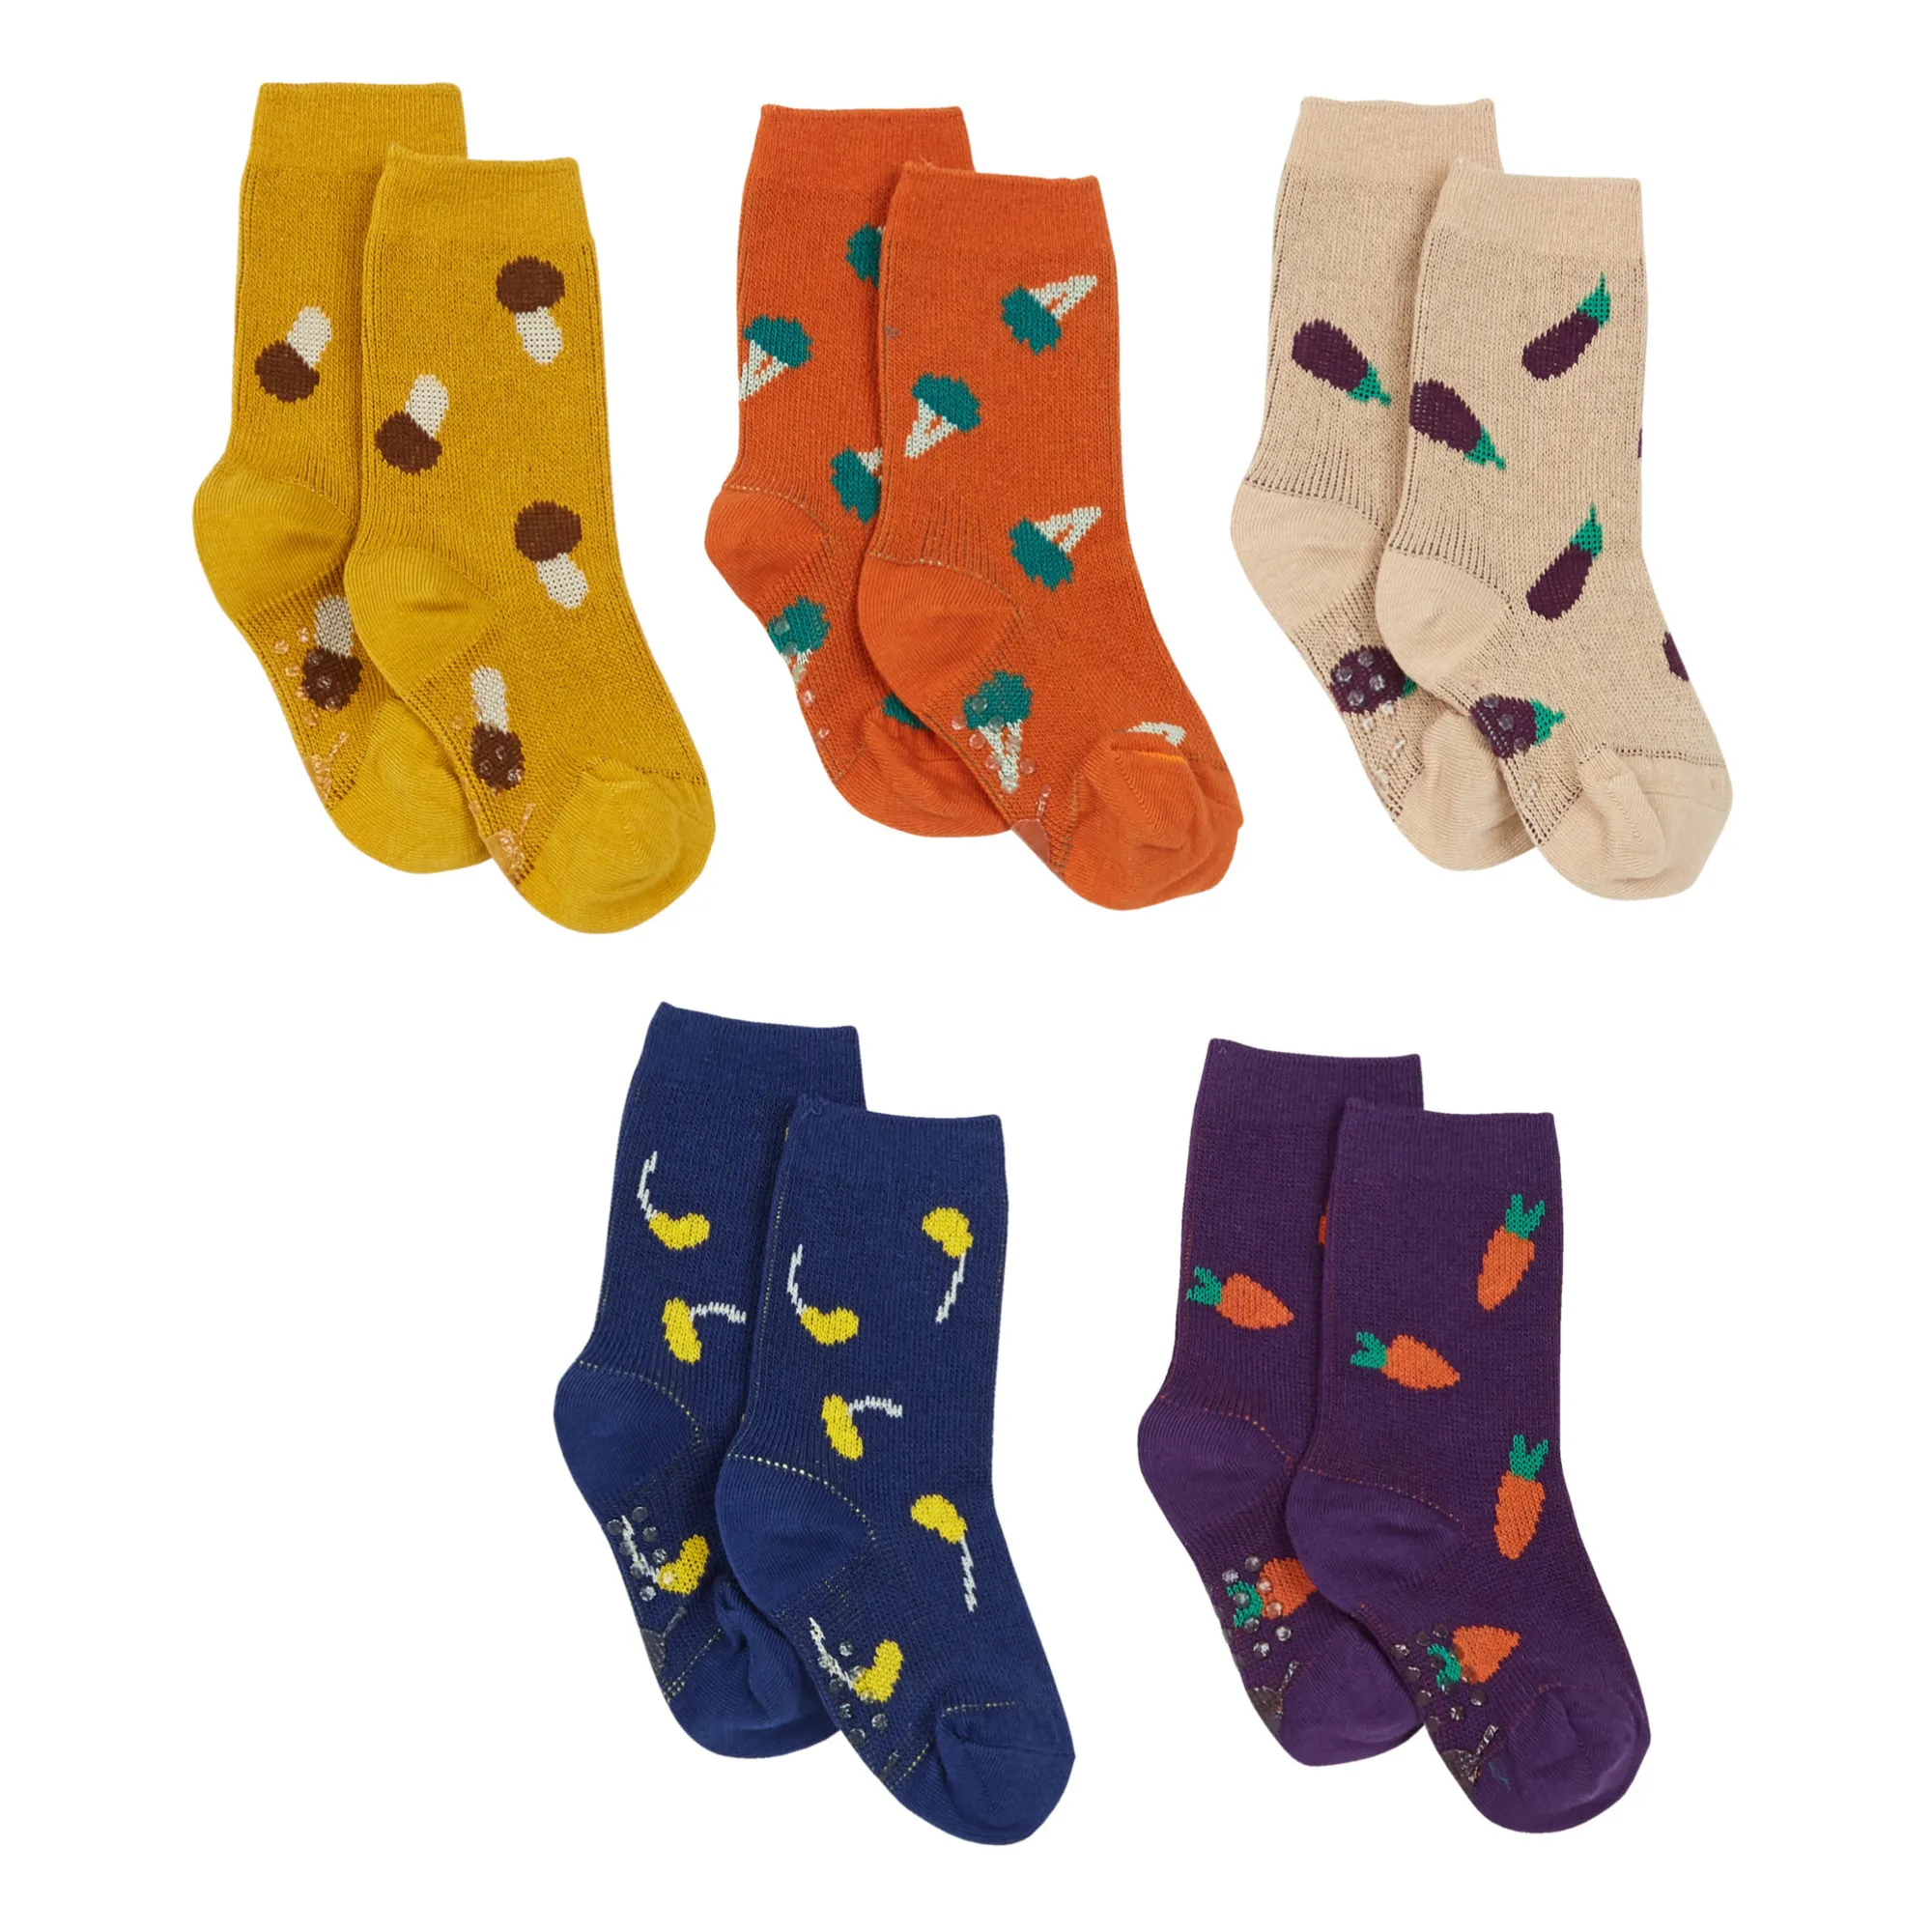 Family Sock Set (5 pairs of socks) – Olive and June